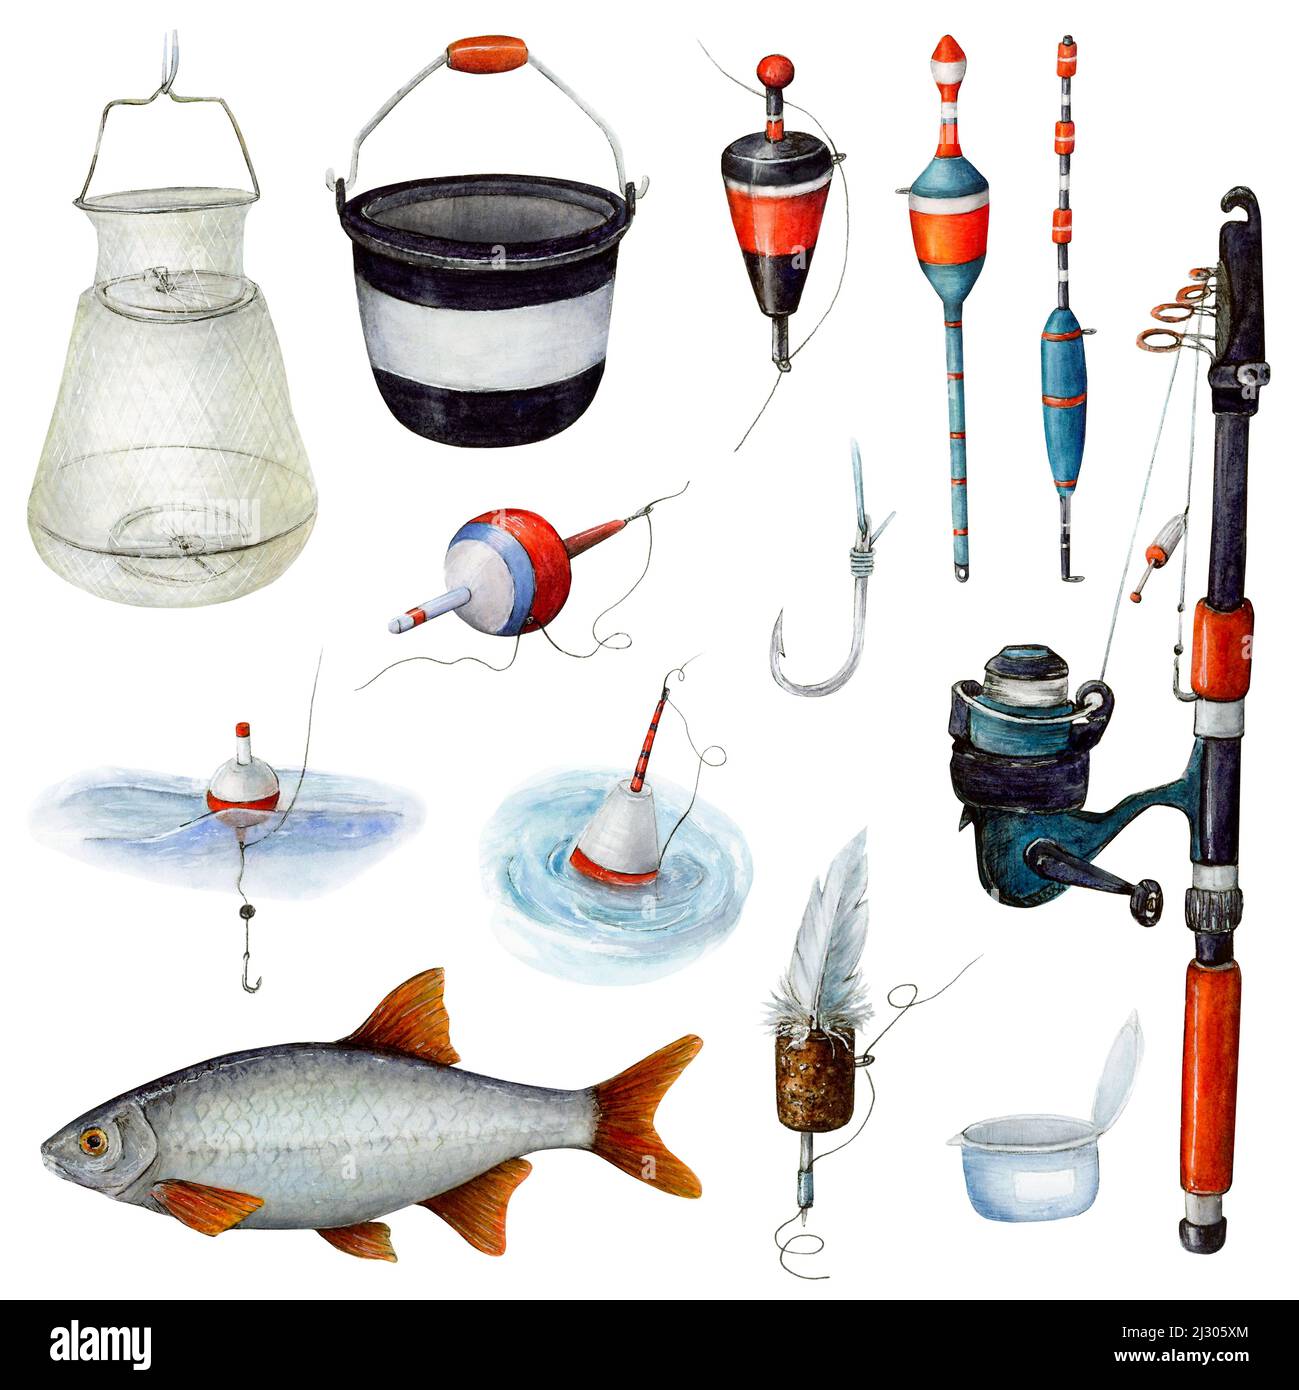 https://c8.alamy.com/comp/2J305XM/fishing-seamless-pattern-with-floata-set-of-fishing-items-for-catching-fish-with-a-line-and-hook-bright-multi-colored-floats-and-attributes-of-a-fis-2J305XM.jpg